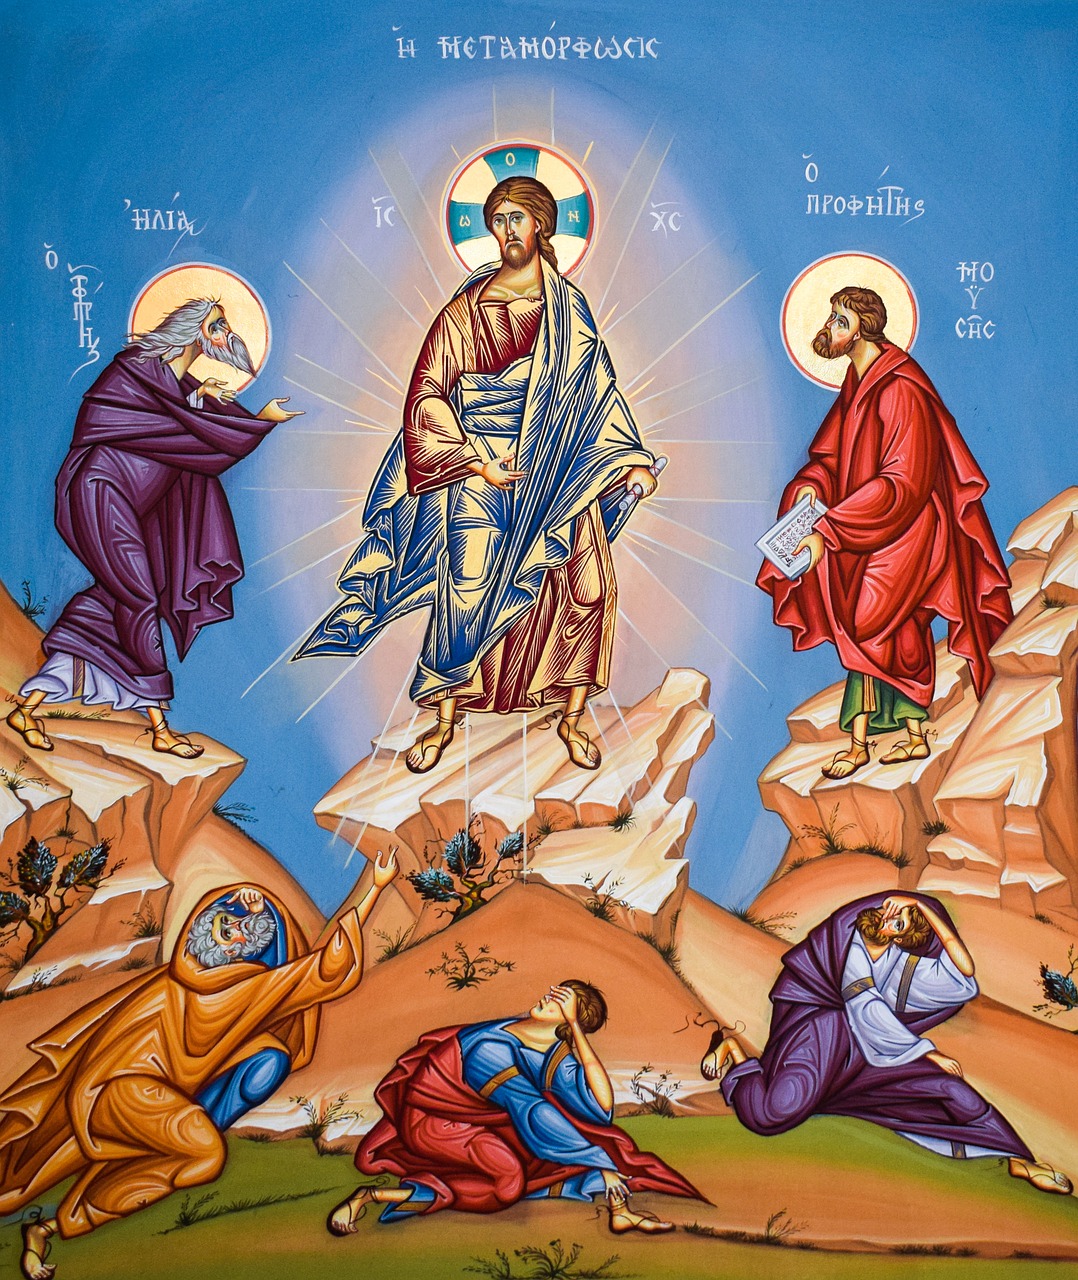 The transfiguration of Christ from today's reading with Wes Schaeffer.